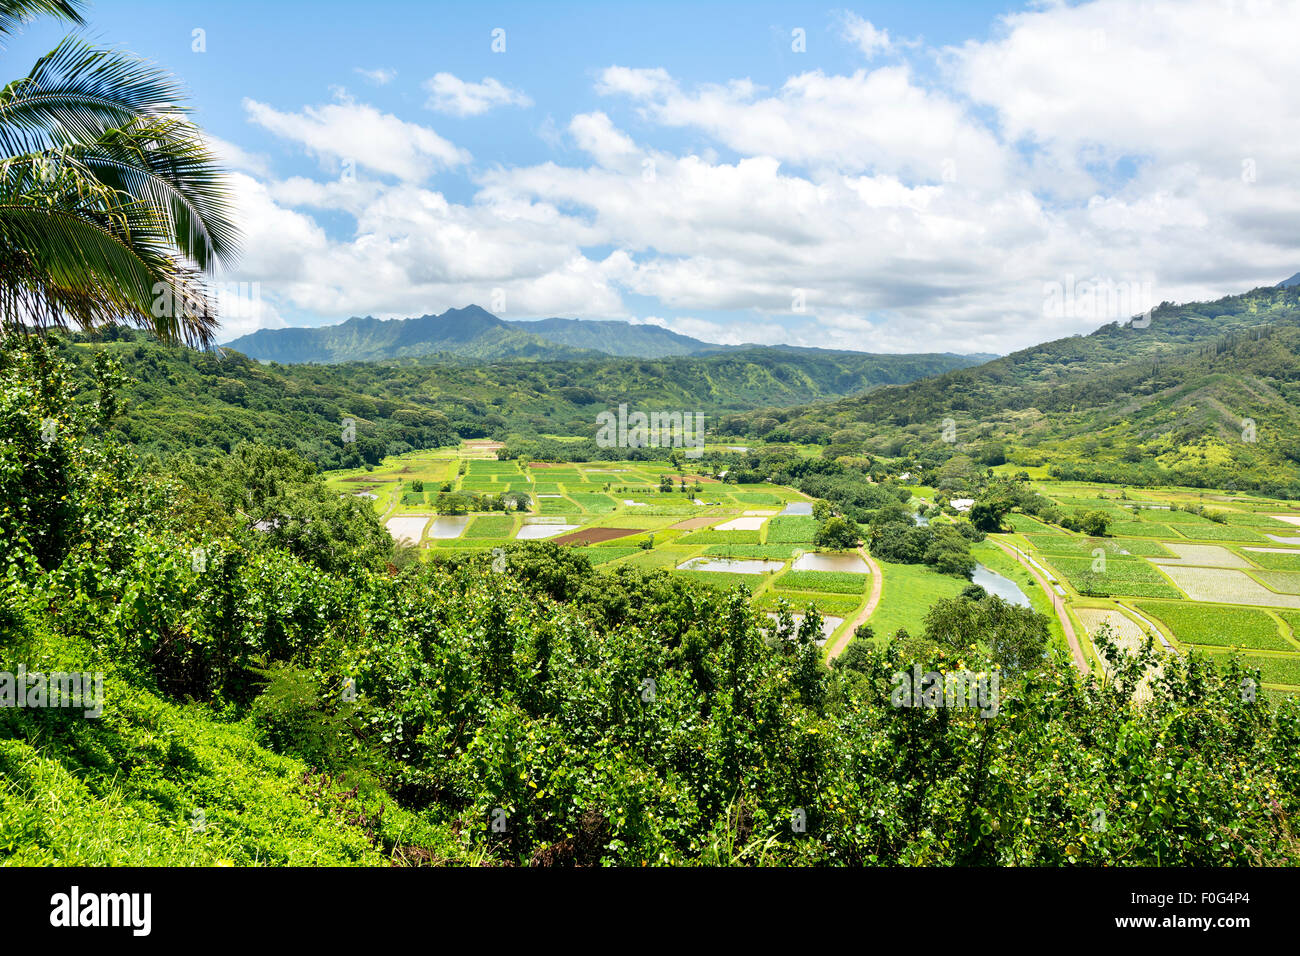 A large farming field with various crops in a remote part of Kauai Island, Hawaii Stock Photo